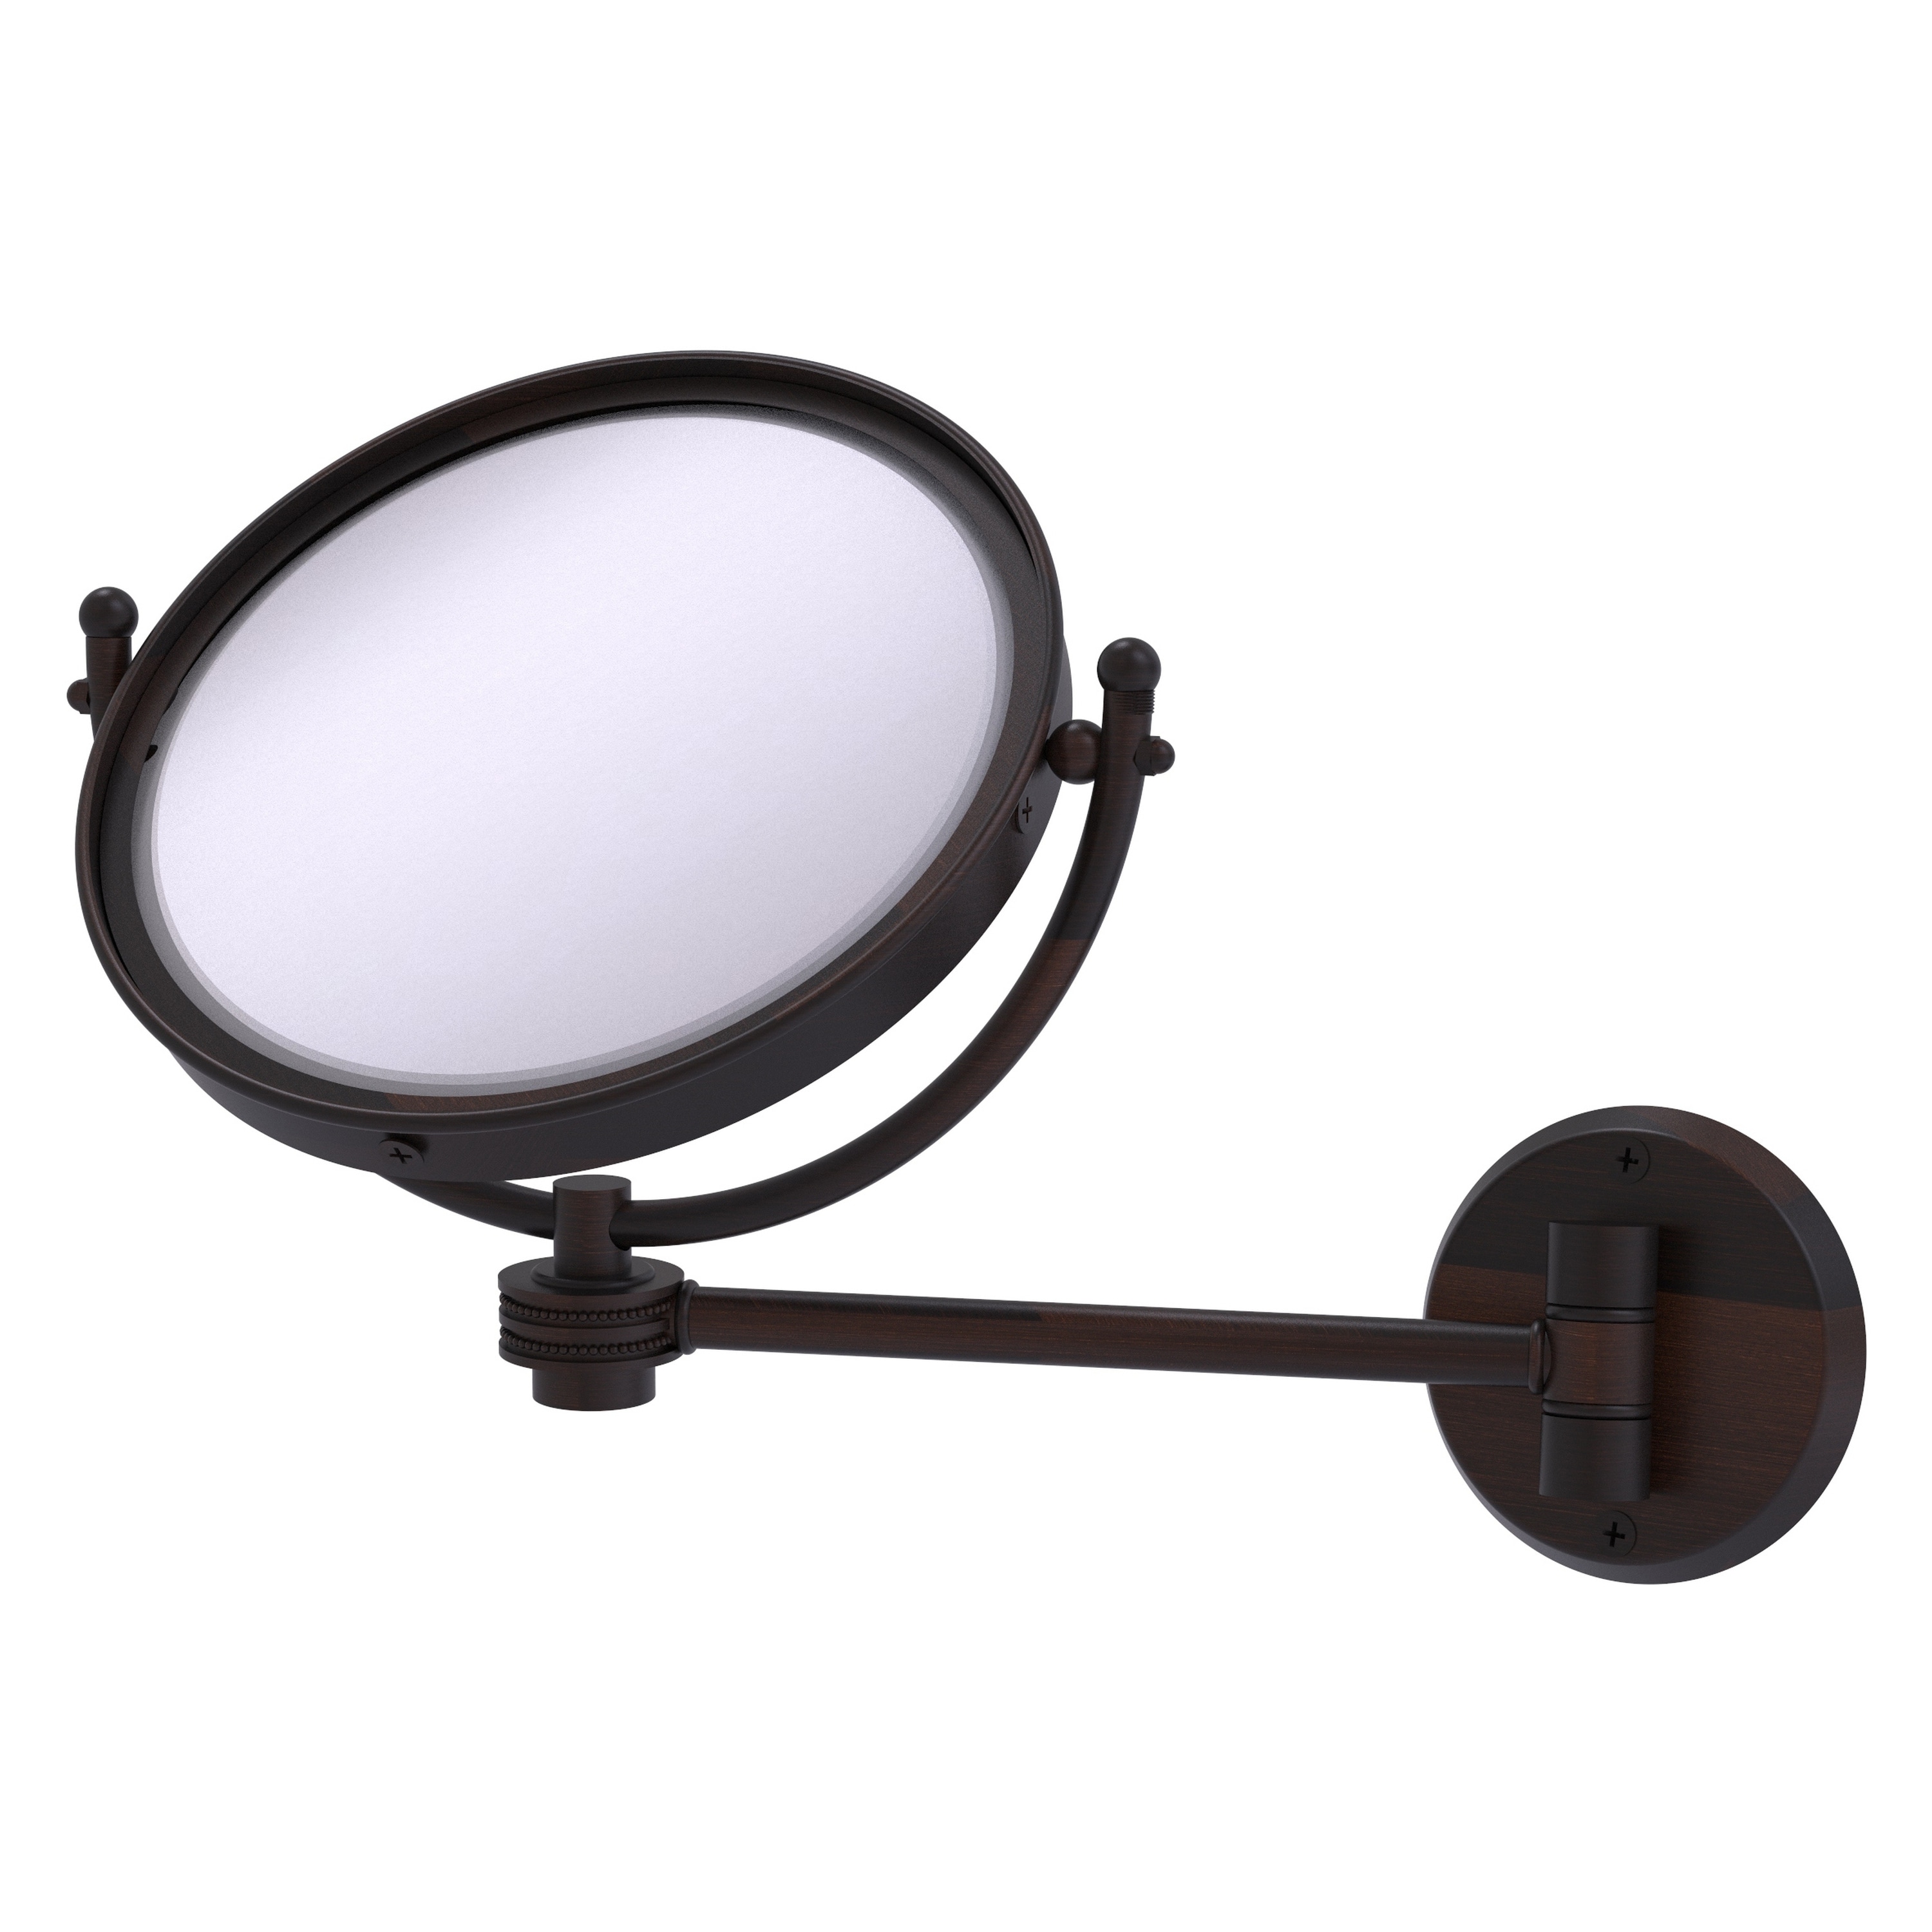 8-in x 10-in Distressed White Double-sided 2X Magnifying Wall-mounted Vanity Mirror | - Allied Brass WM-5D/2X-VB